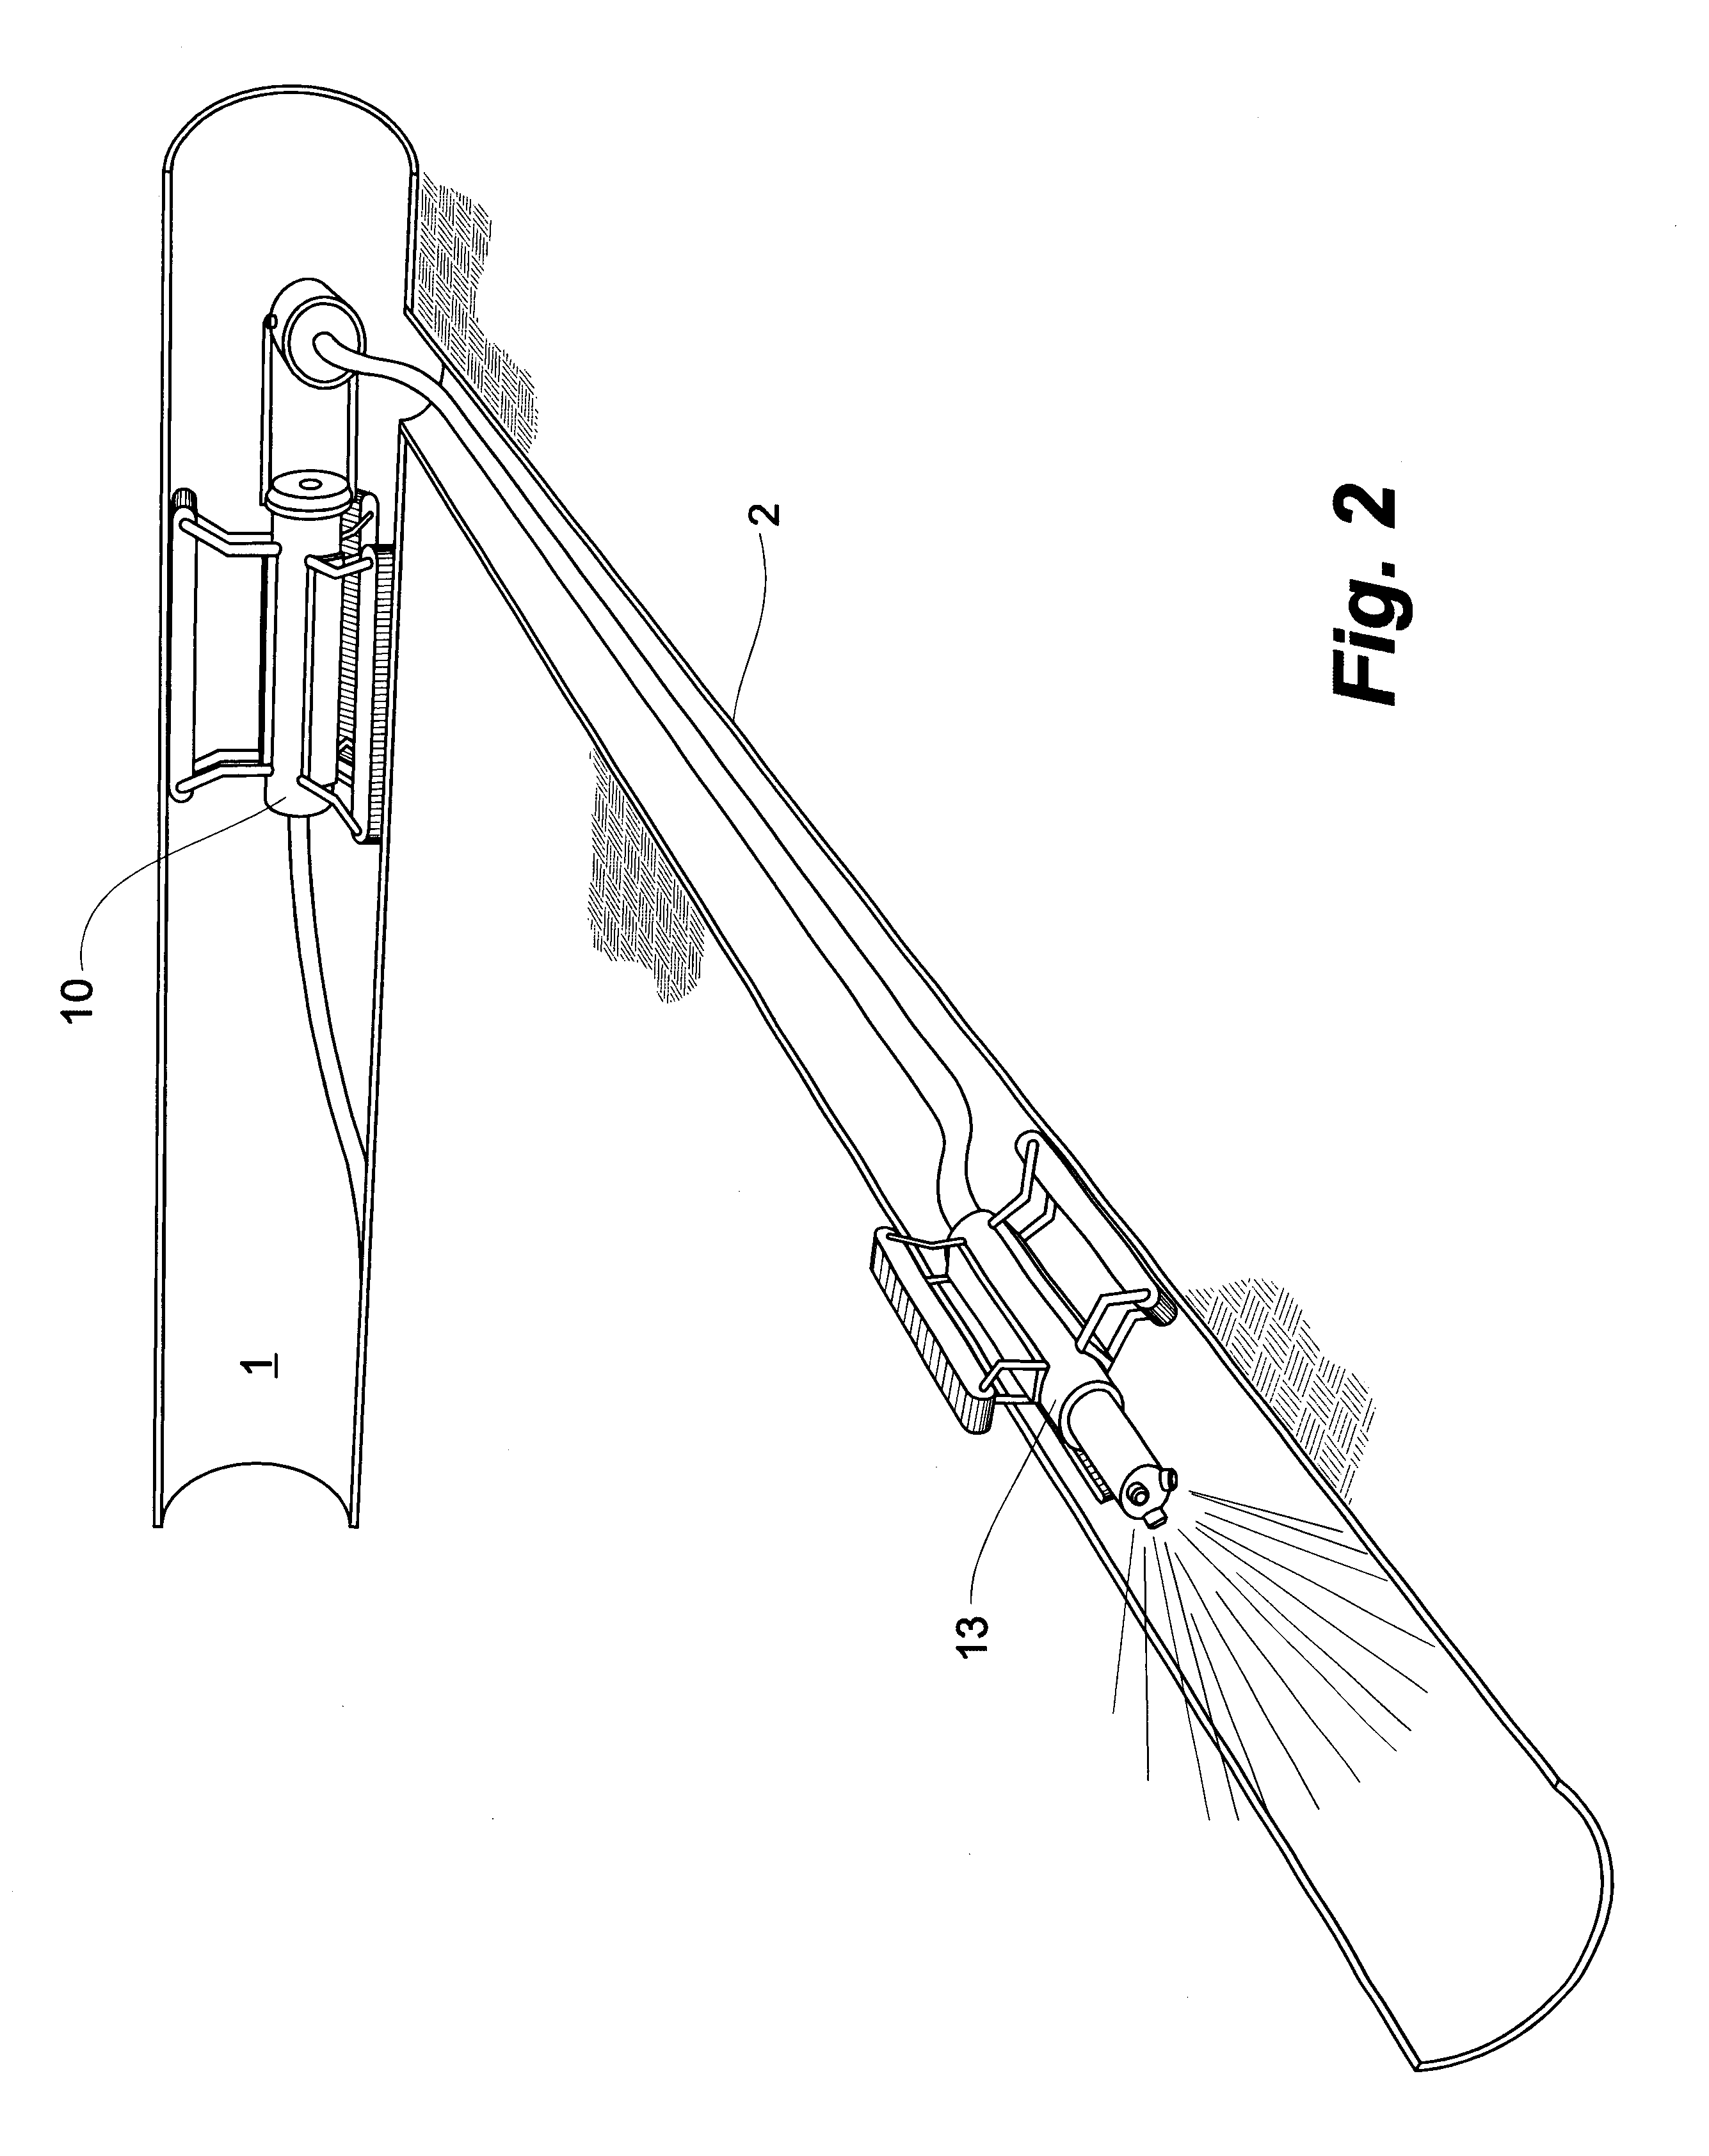 Robotic apparatus and method for treatment of conduits